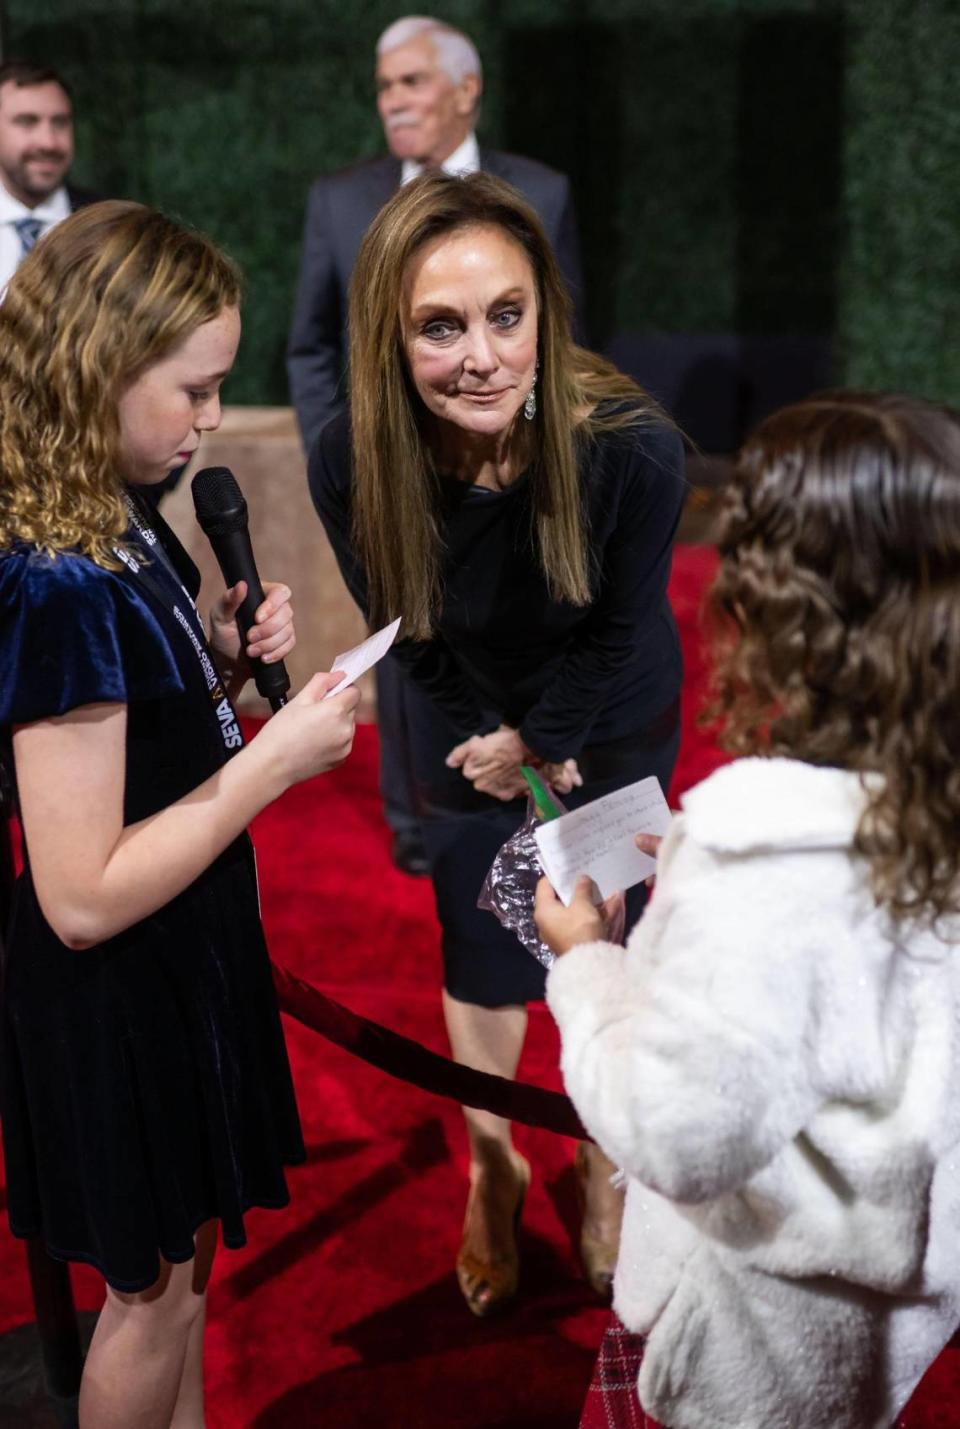 Olympic champion, national spokesperson and commentator Peggy Fleming, part of the 15th class of inductees to the California Hall of Fame, is interviewed by Elk Grove’s Florence Markofer Elementary School student Emma Kingsbury, 10, left, on the red carpet Tuesday, Dec. 13, 2022, before the induction ceremony at the California Museum in downtown Sacramento.